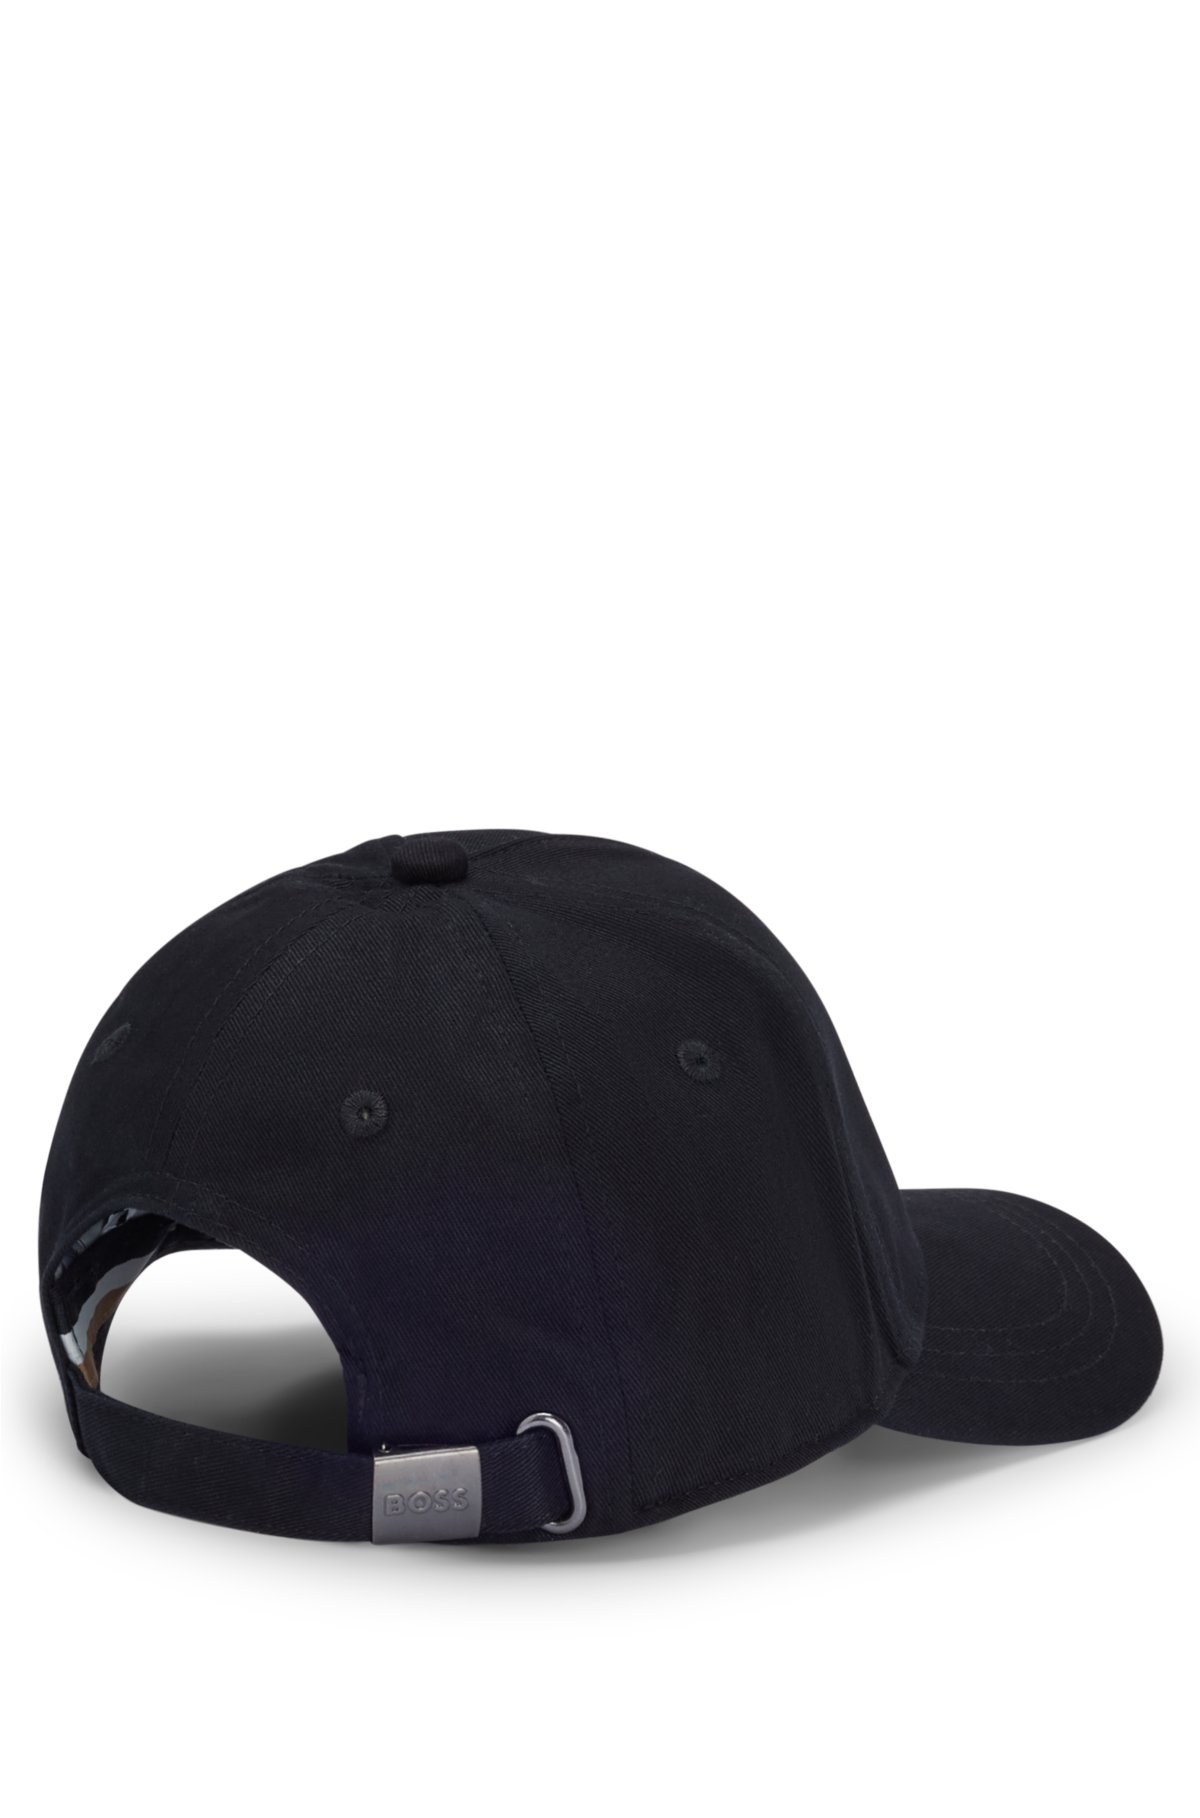 Kids' cap in cotton twill with logo details, Black